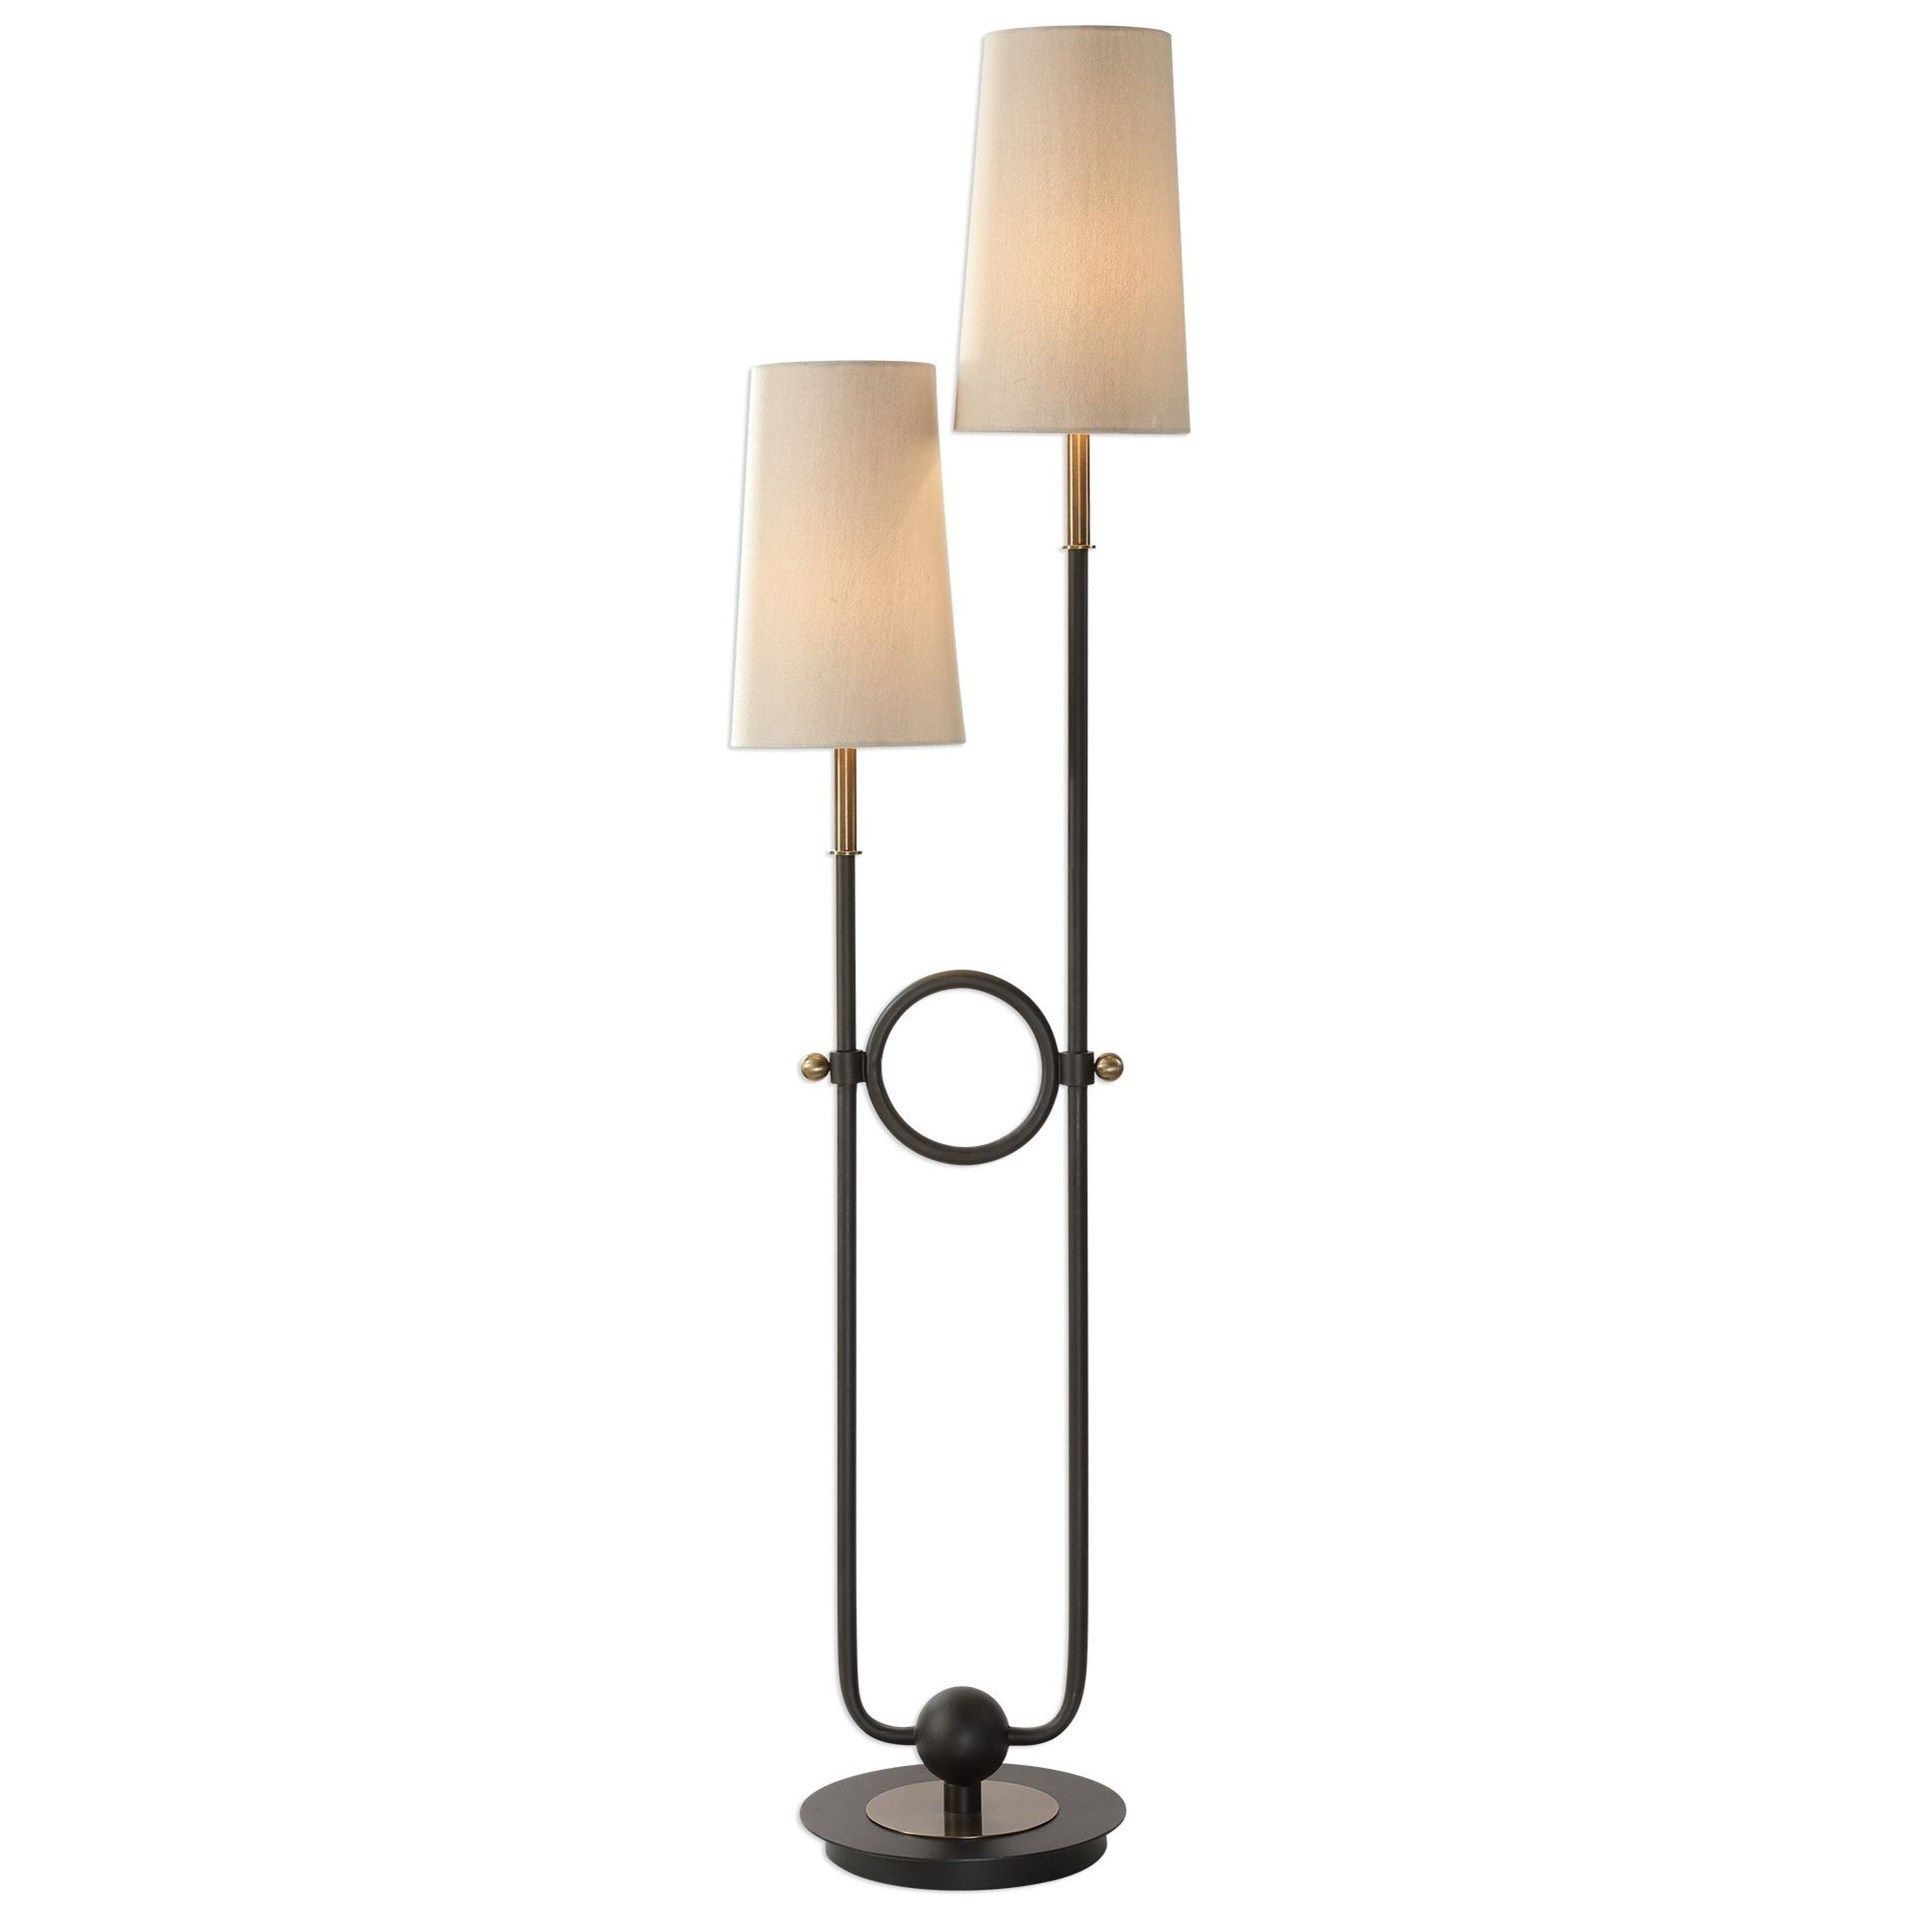 Floor Lamps Riano 2 Arm2 Light Floor Lamp Uttermost pertaining to dimensions 1918 X 1918